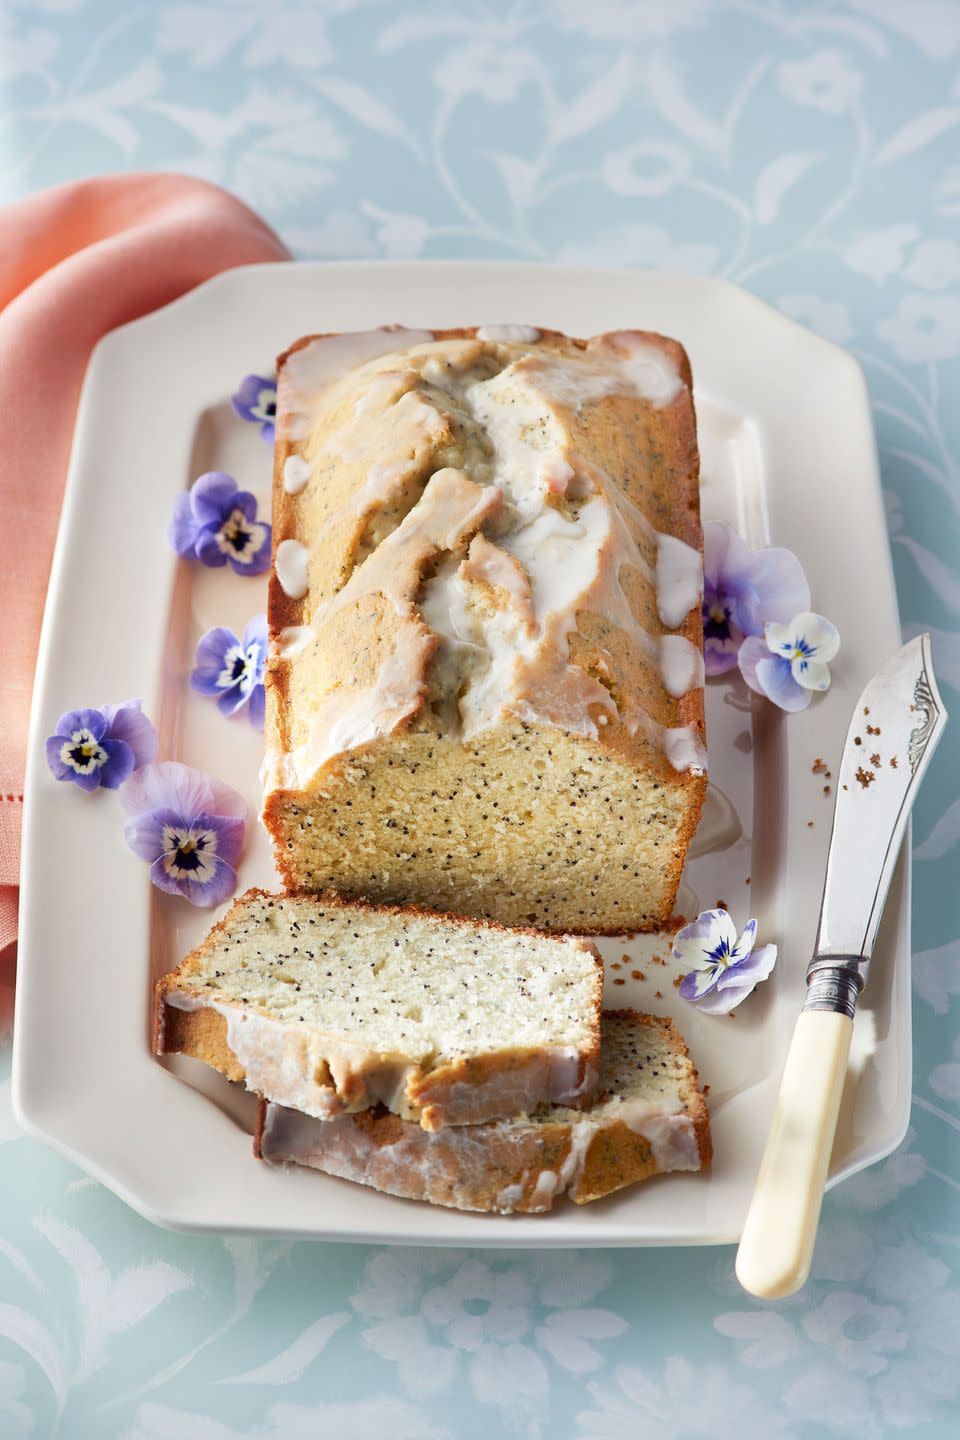 almond and poppy seed loaf cake on a white rectangle plate with pansies for garnish